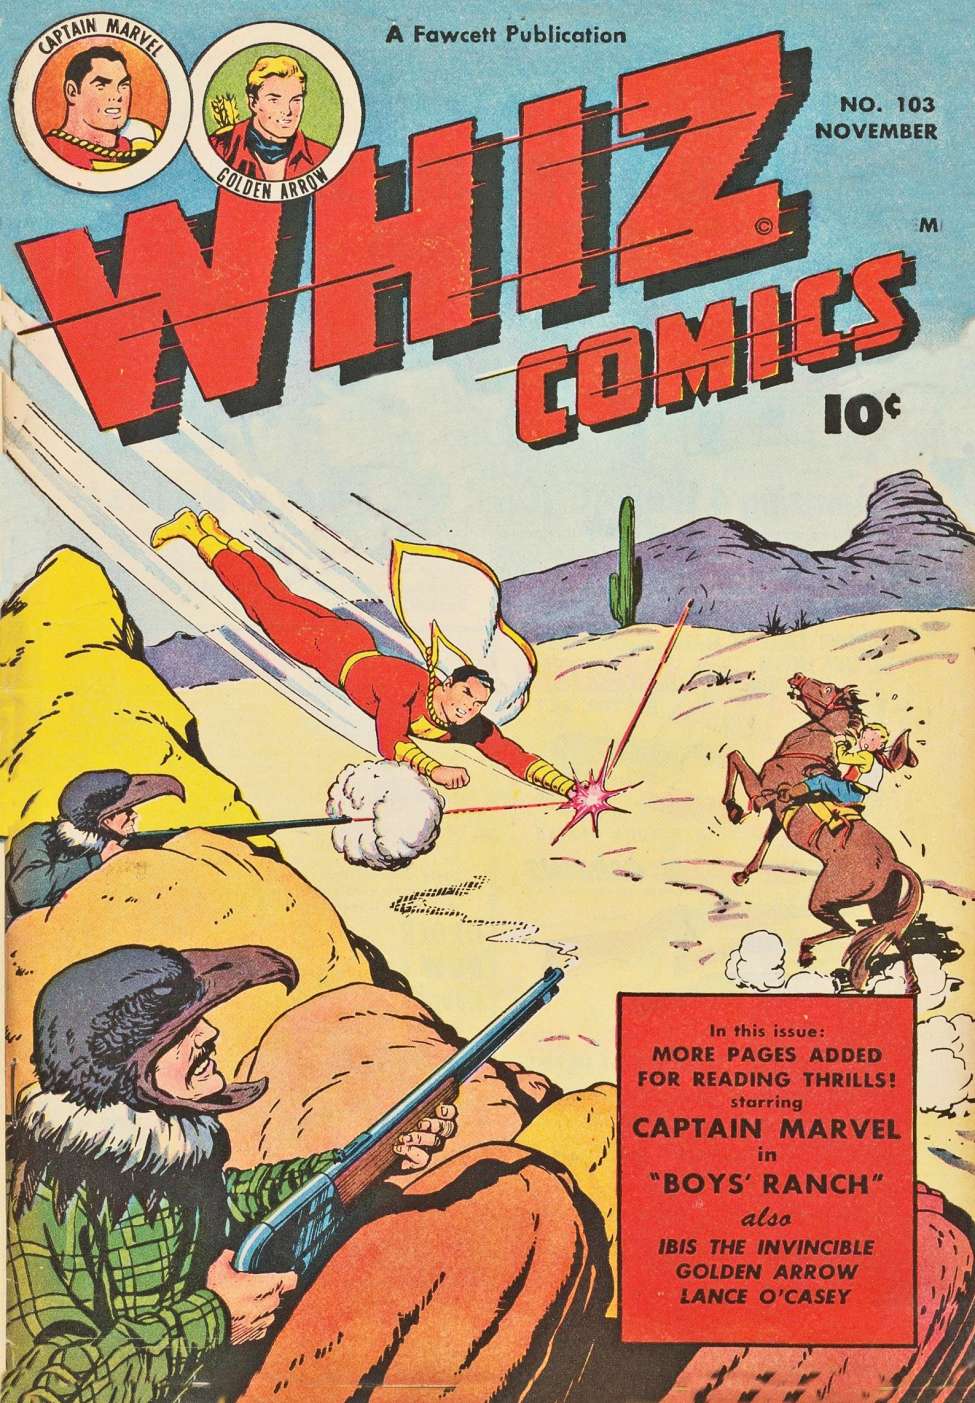 Book Cover For Whiz Comics 103